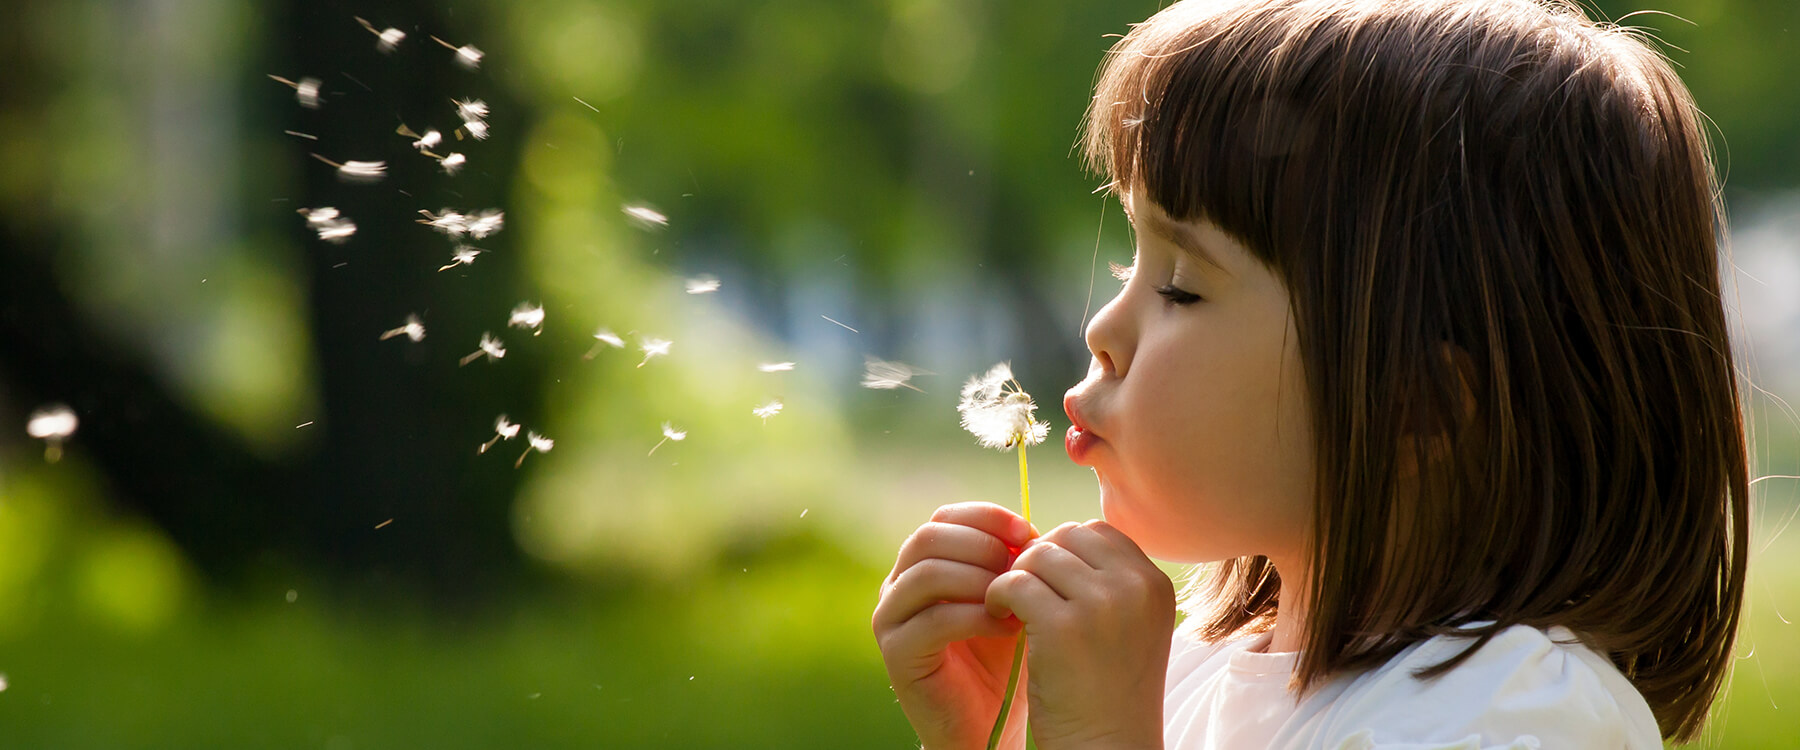 Young Girl Blowing a Dandelion